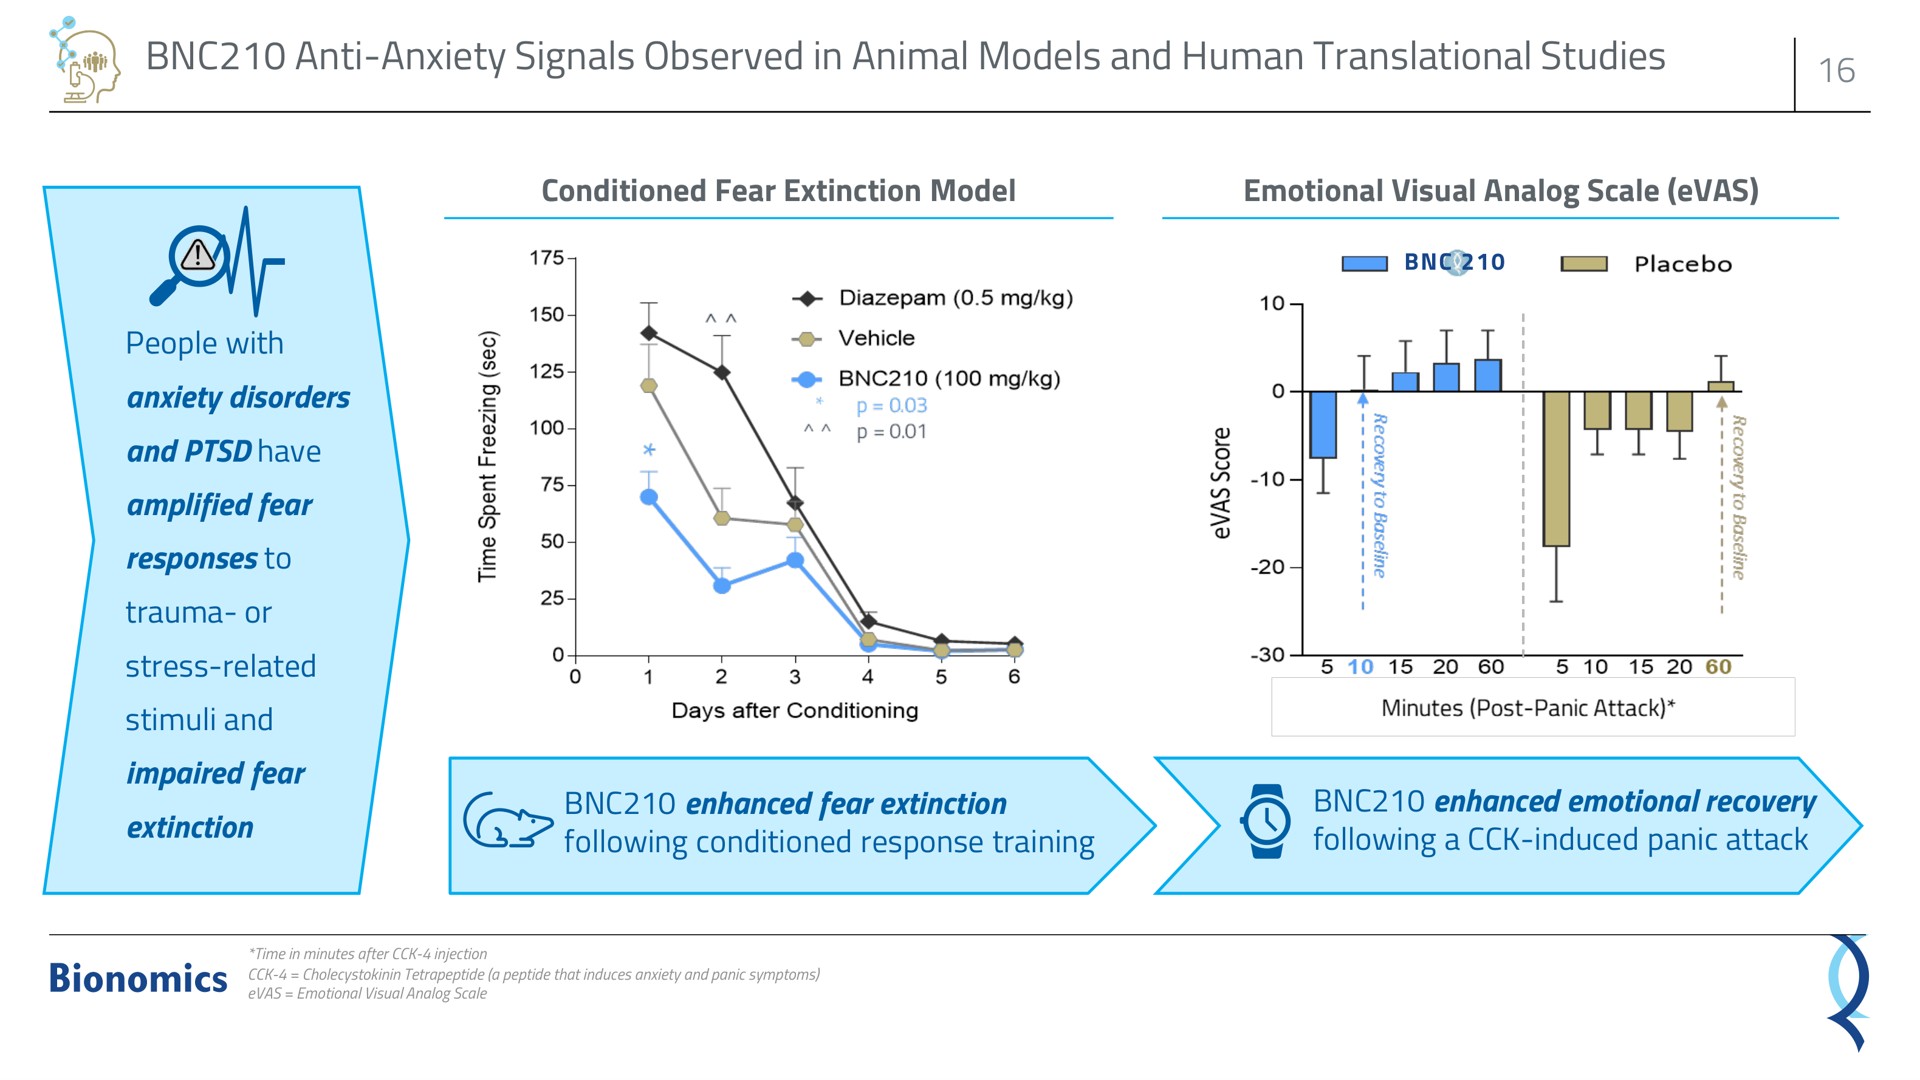 anti anxiety signals observed in animal models and human translational studies | Bionomics